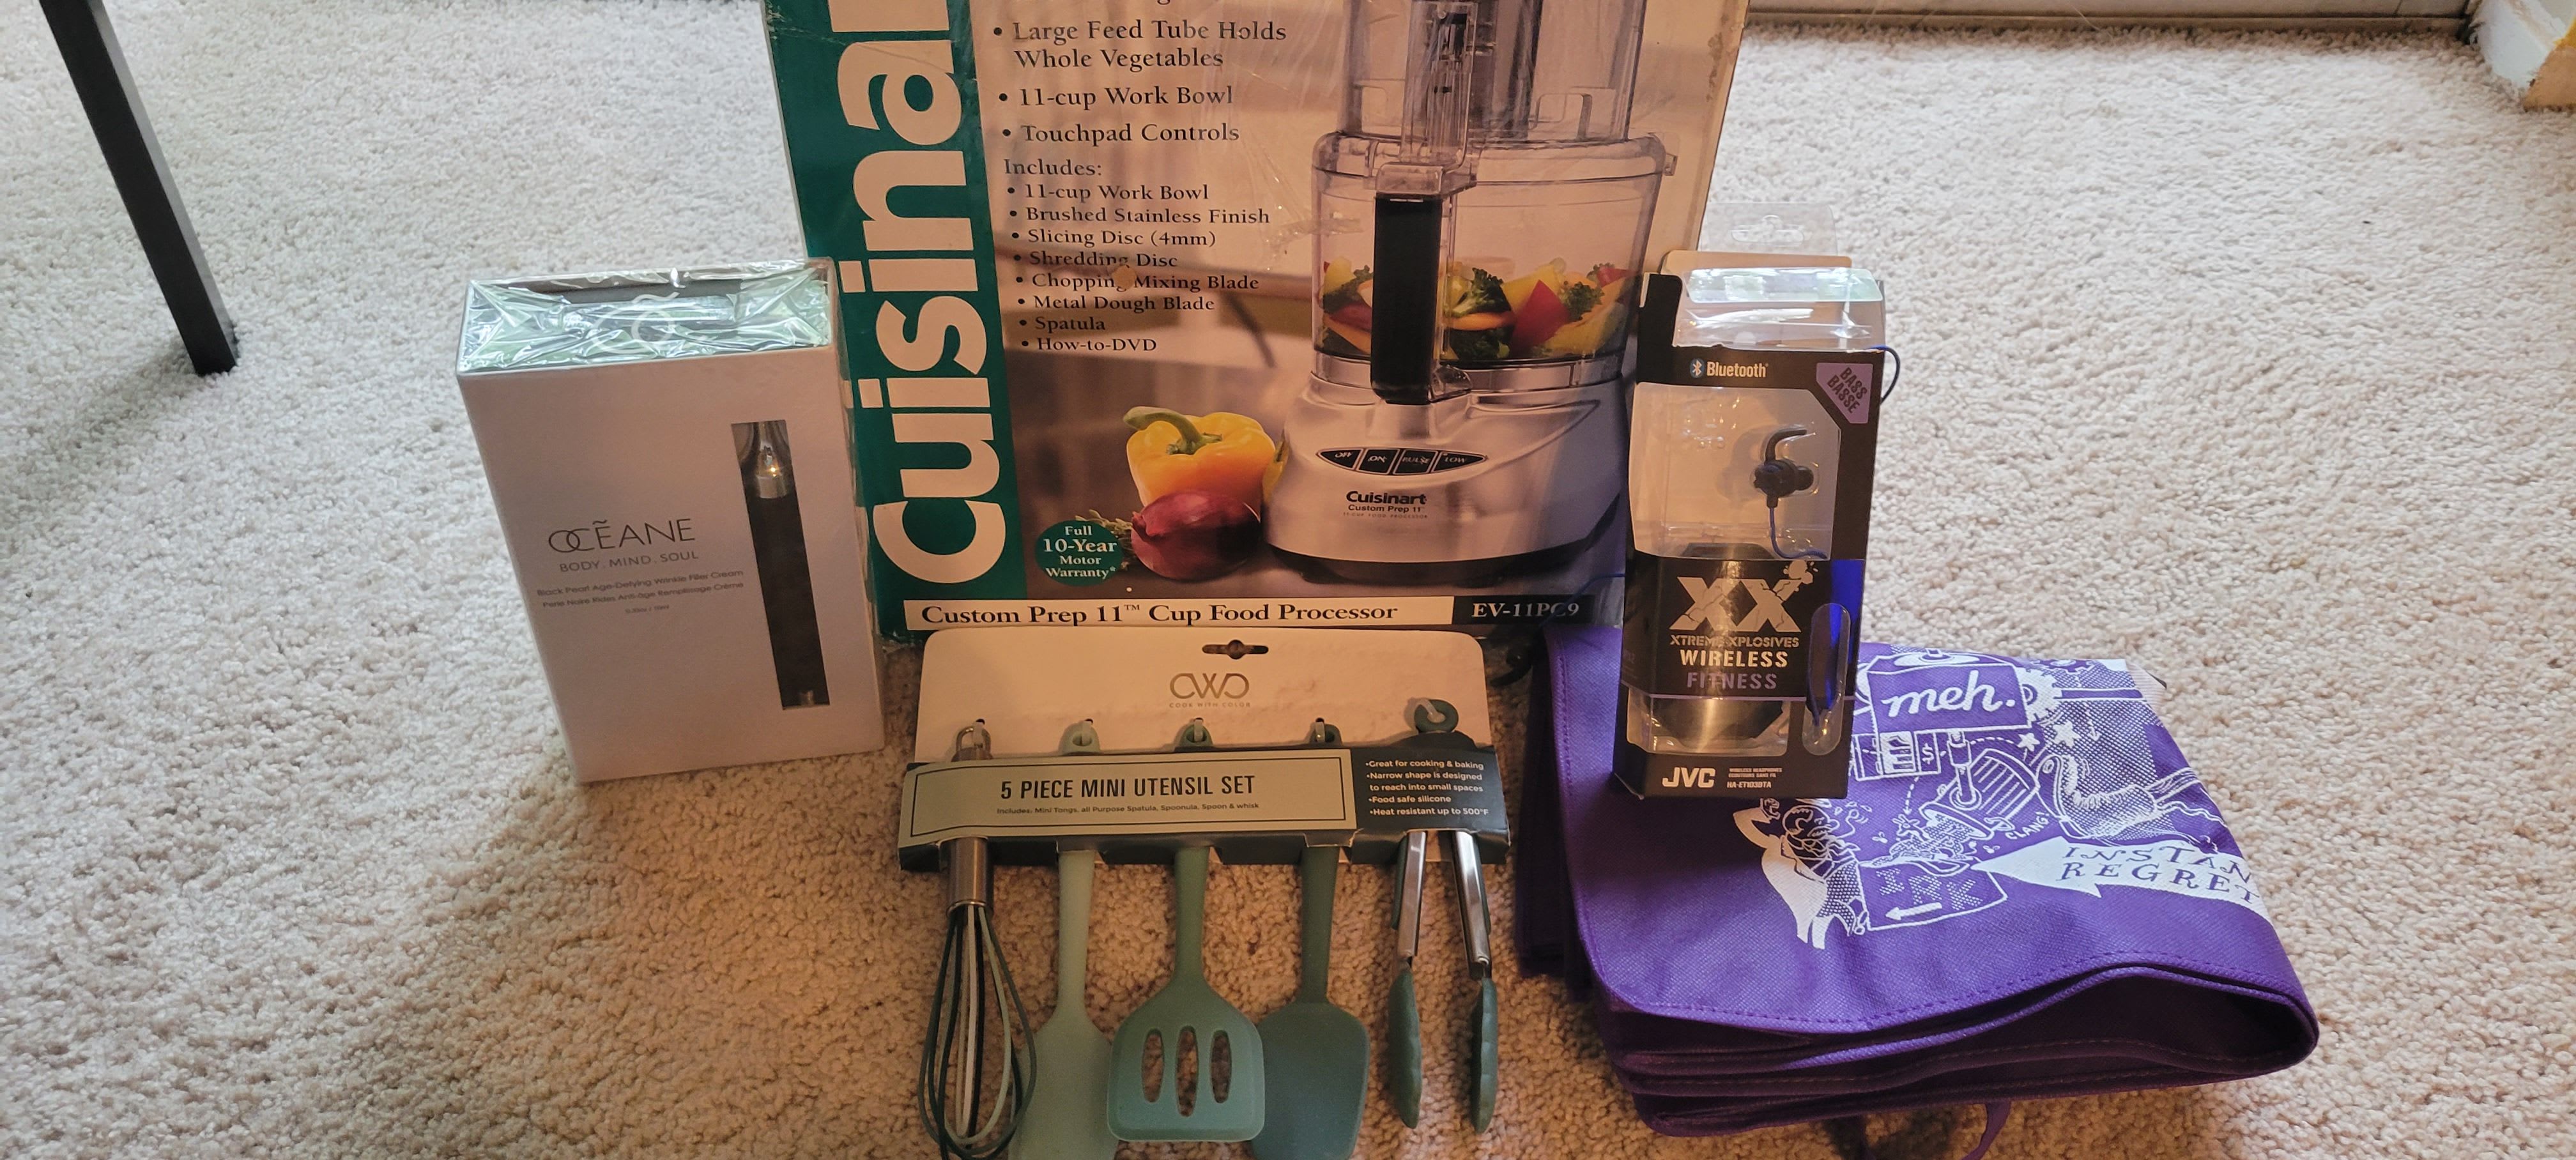 LIKE NEW CUISINART PRESSURE COOKER . SEE PHOTOS - household items - by  owner - housewares sale - craigslist